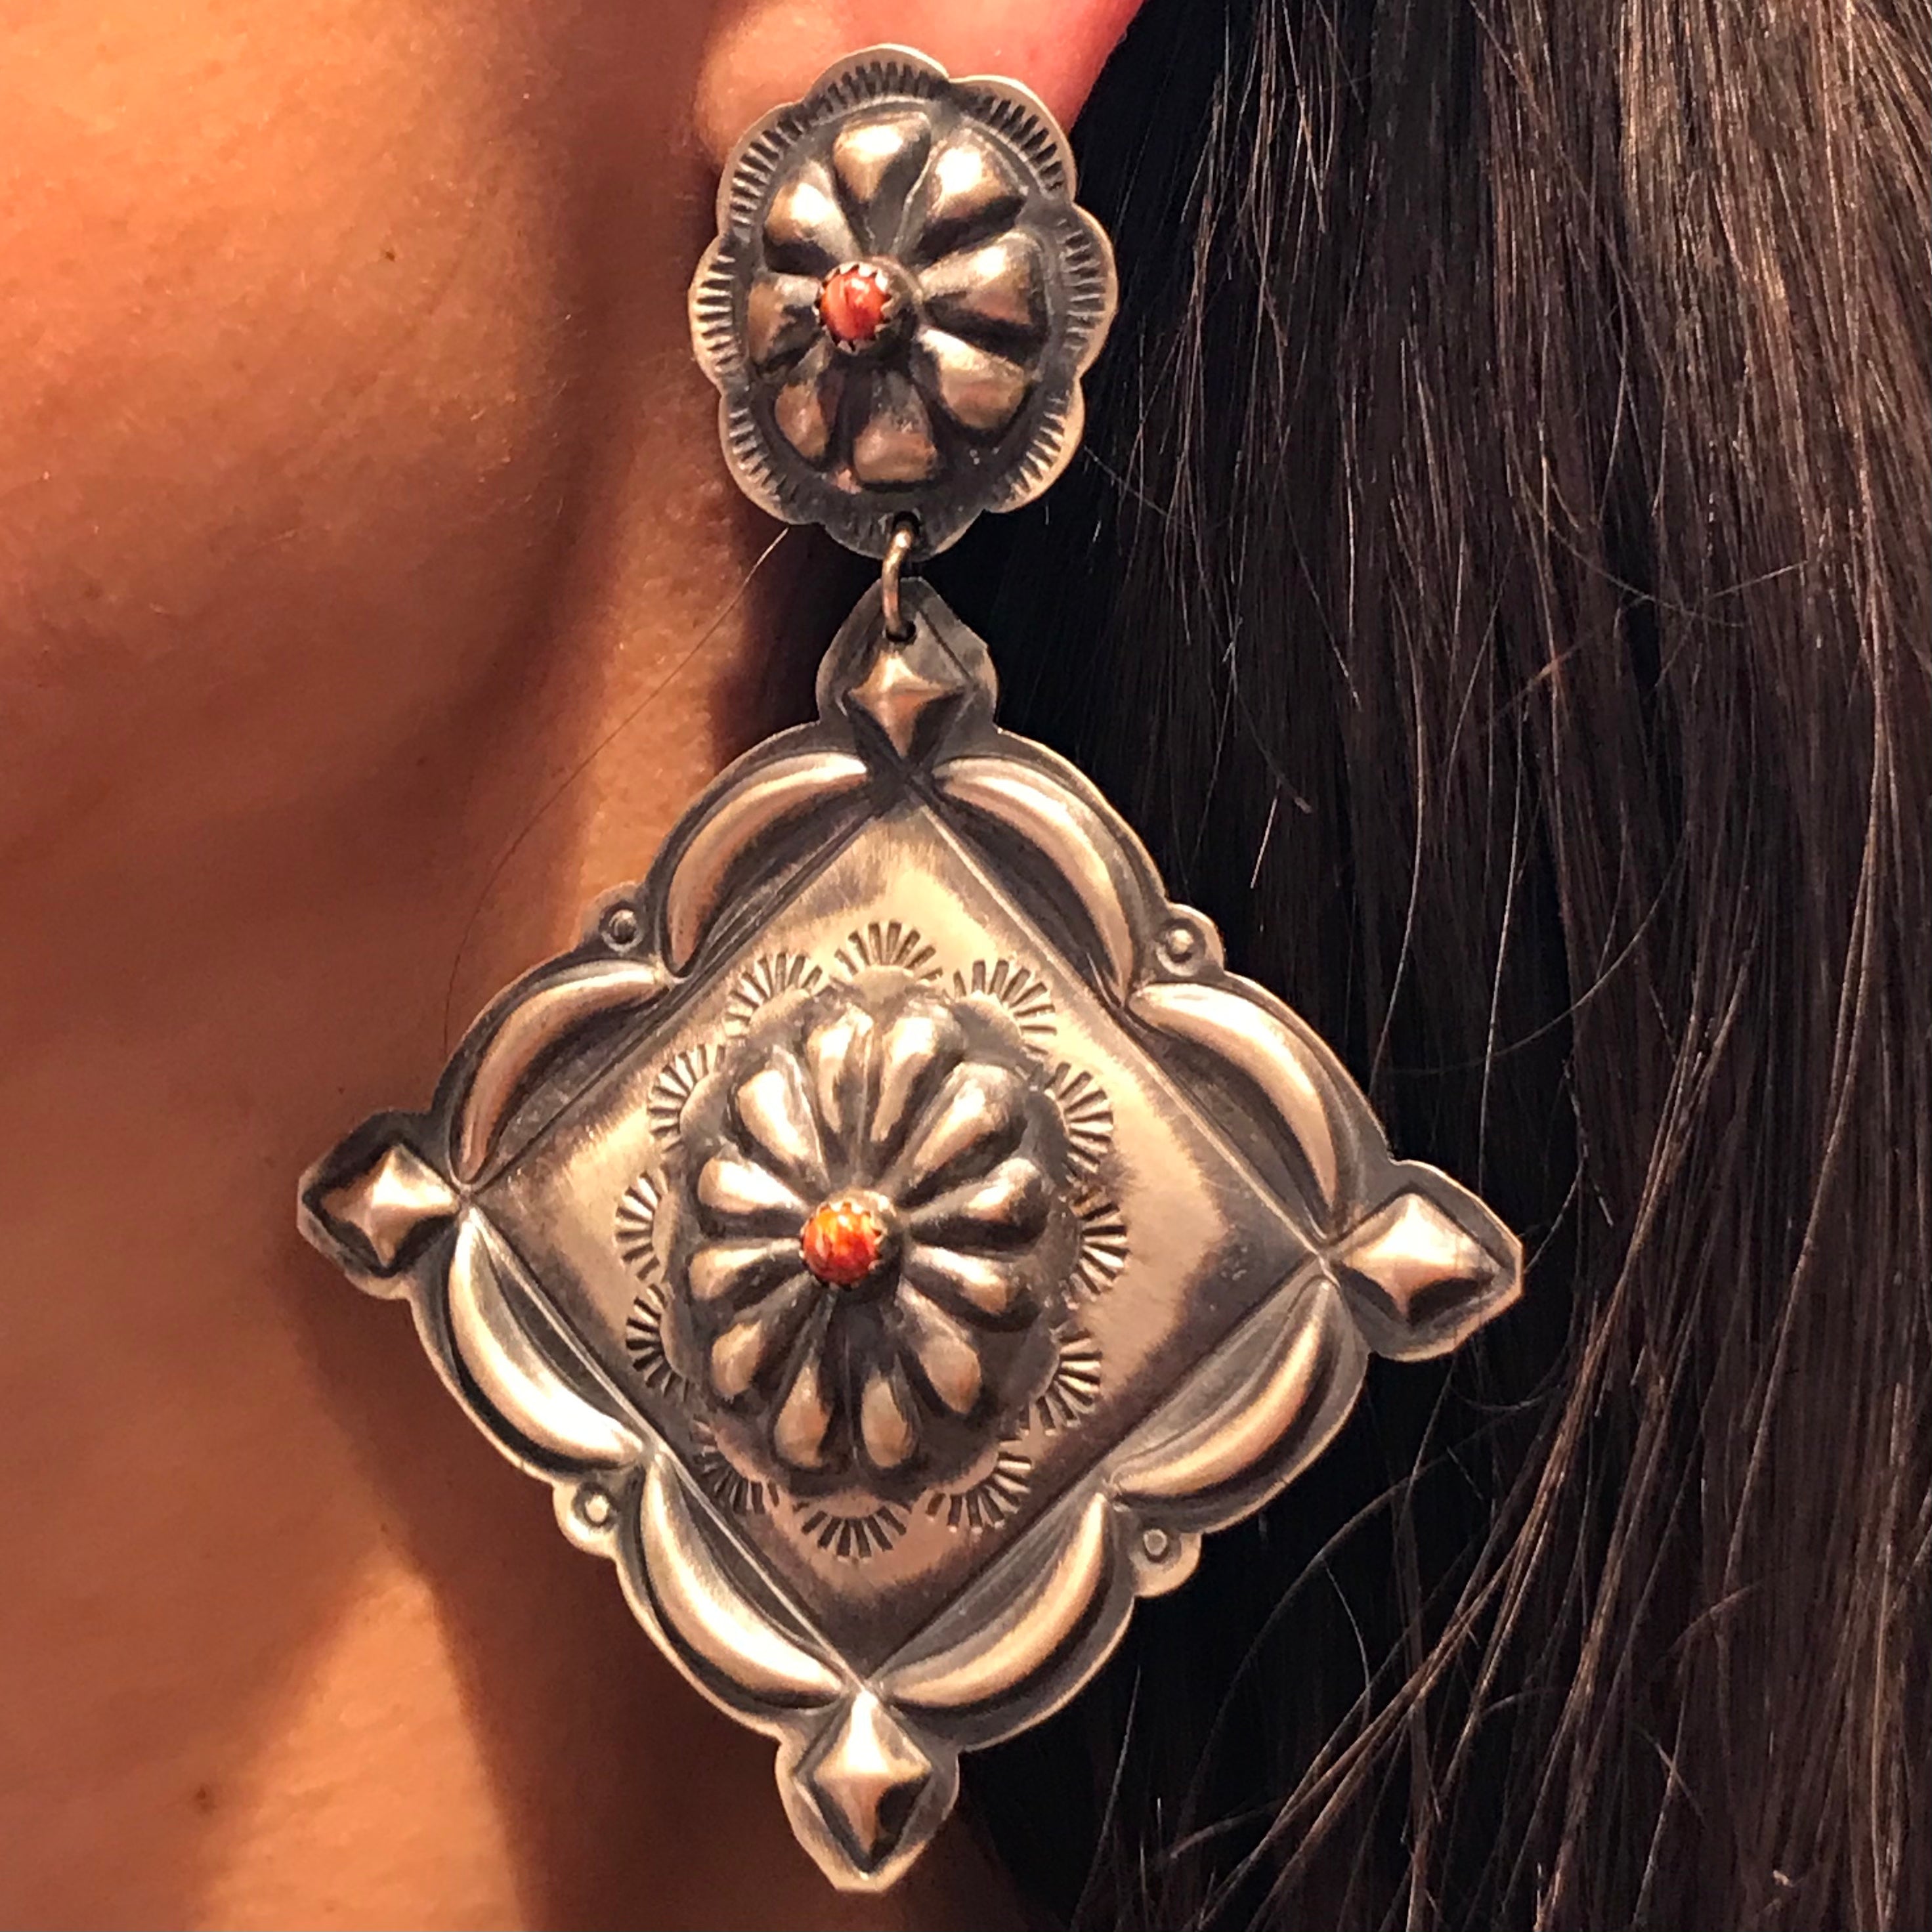 Amazing spiny super large earrings